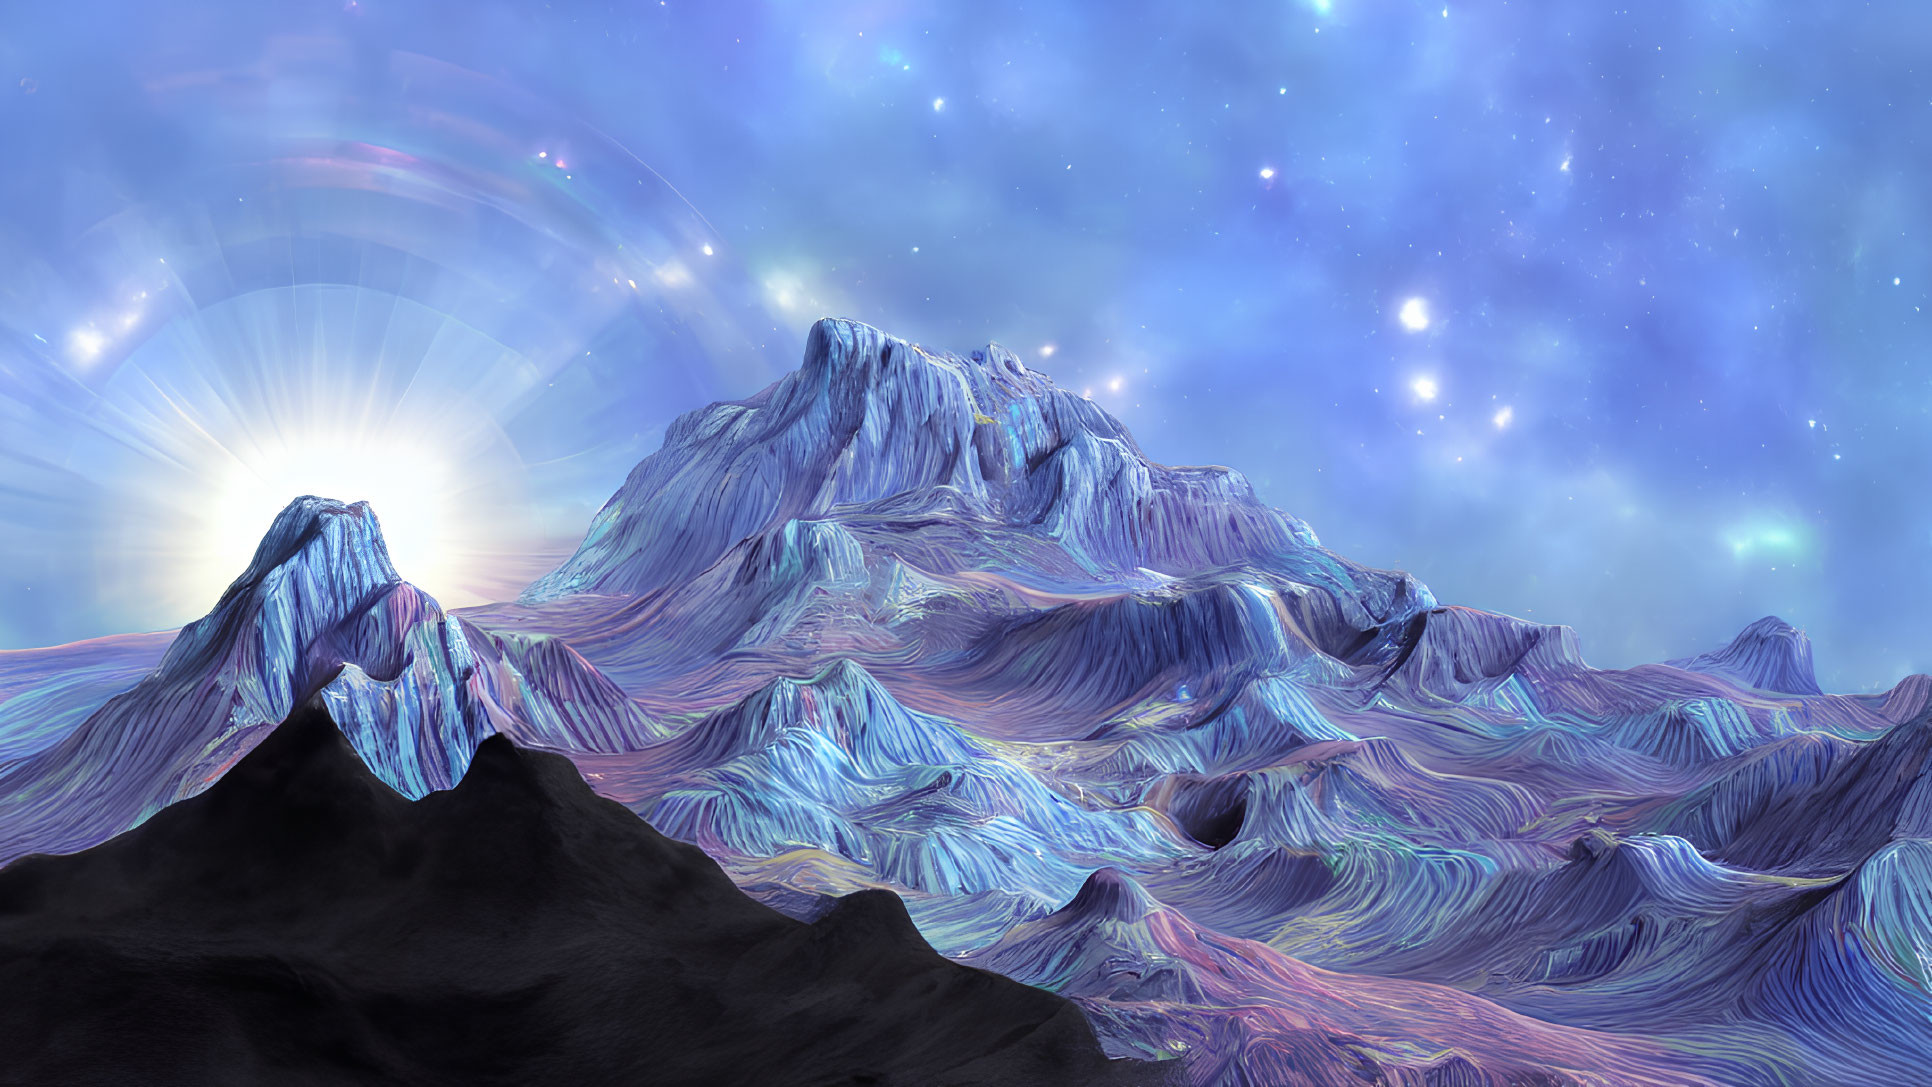 Colorful surreal mountain landscape with swirling patterns and radiant sunrise